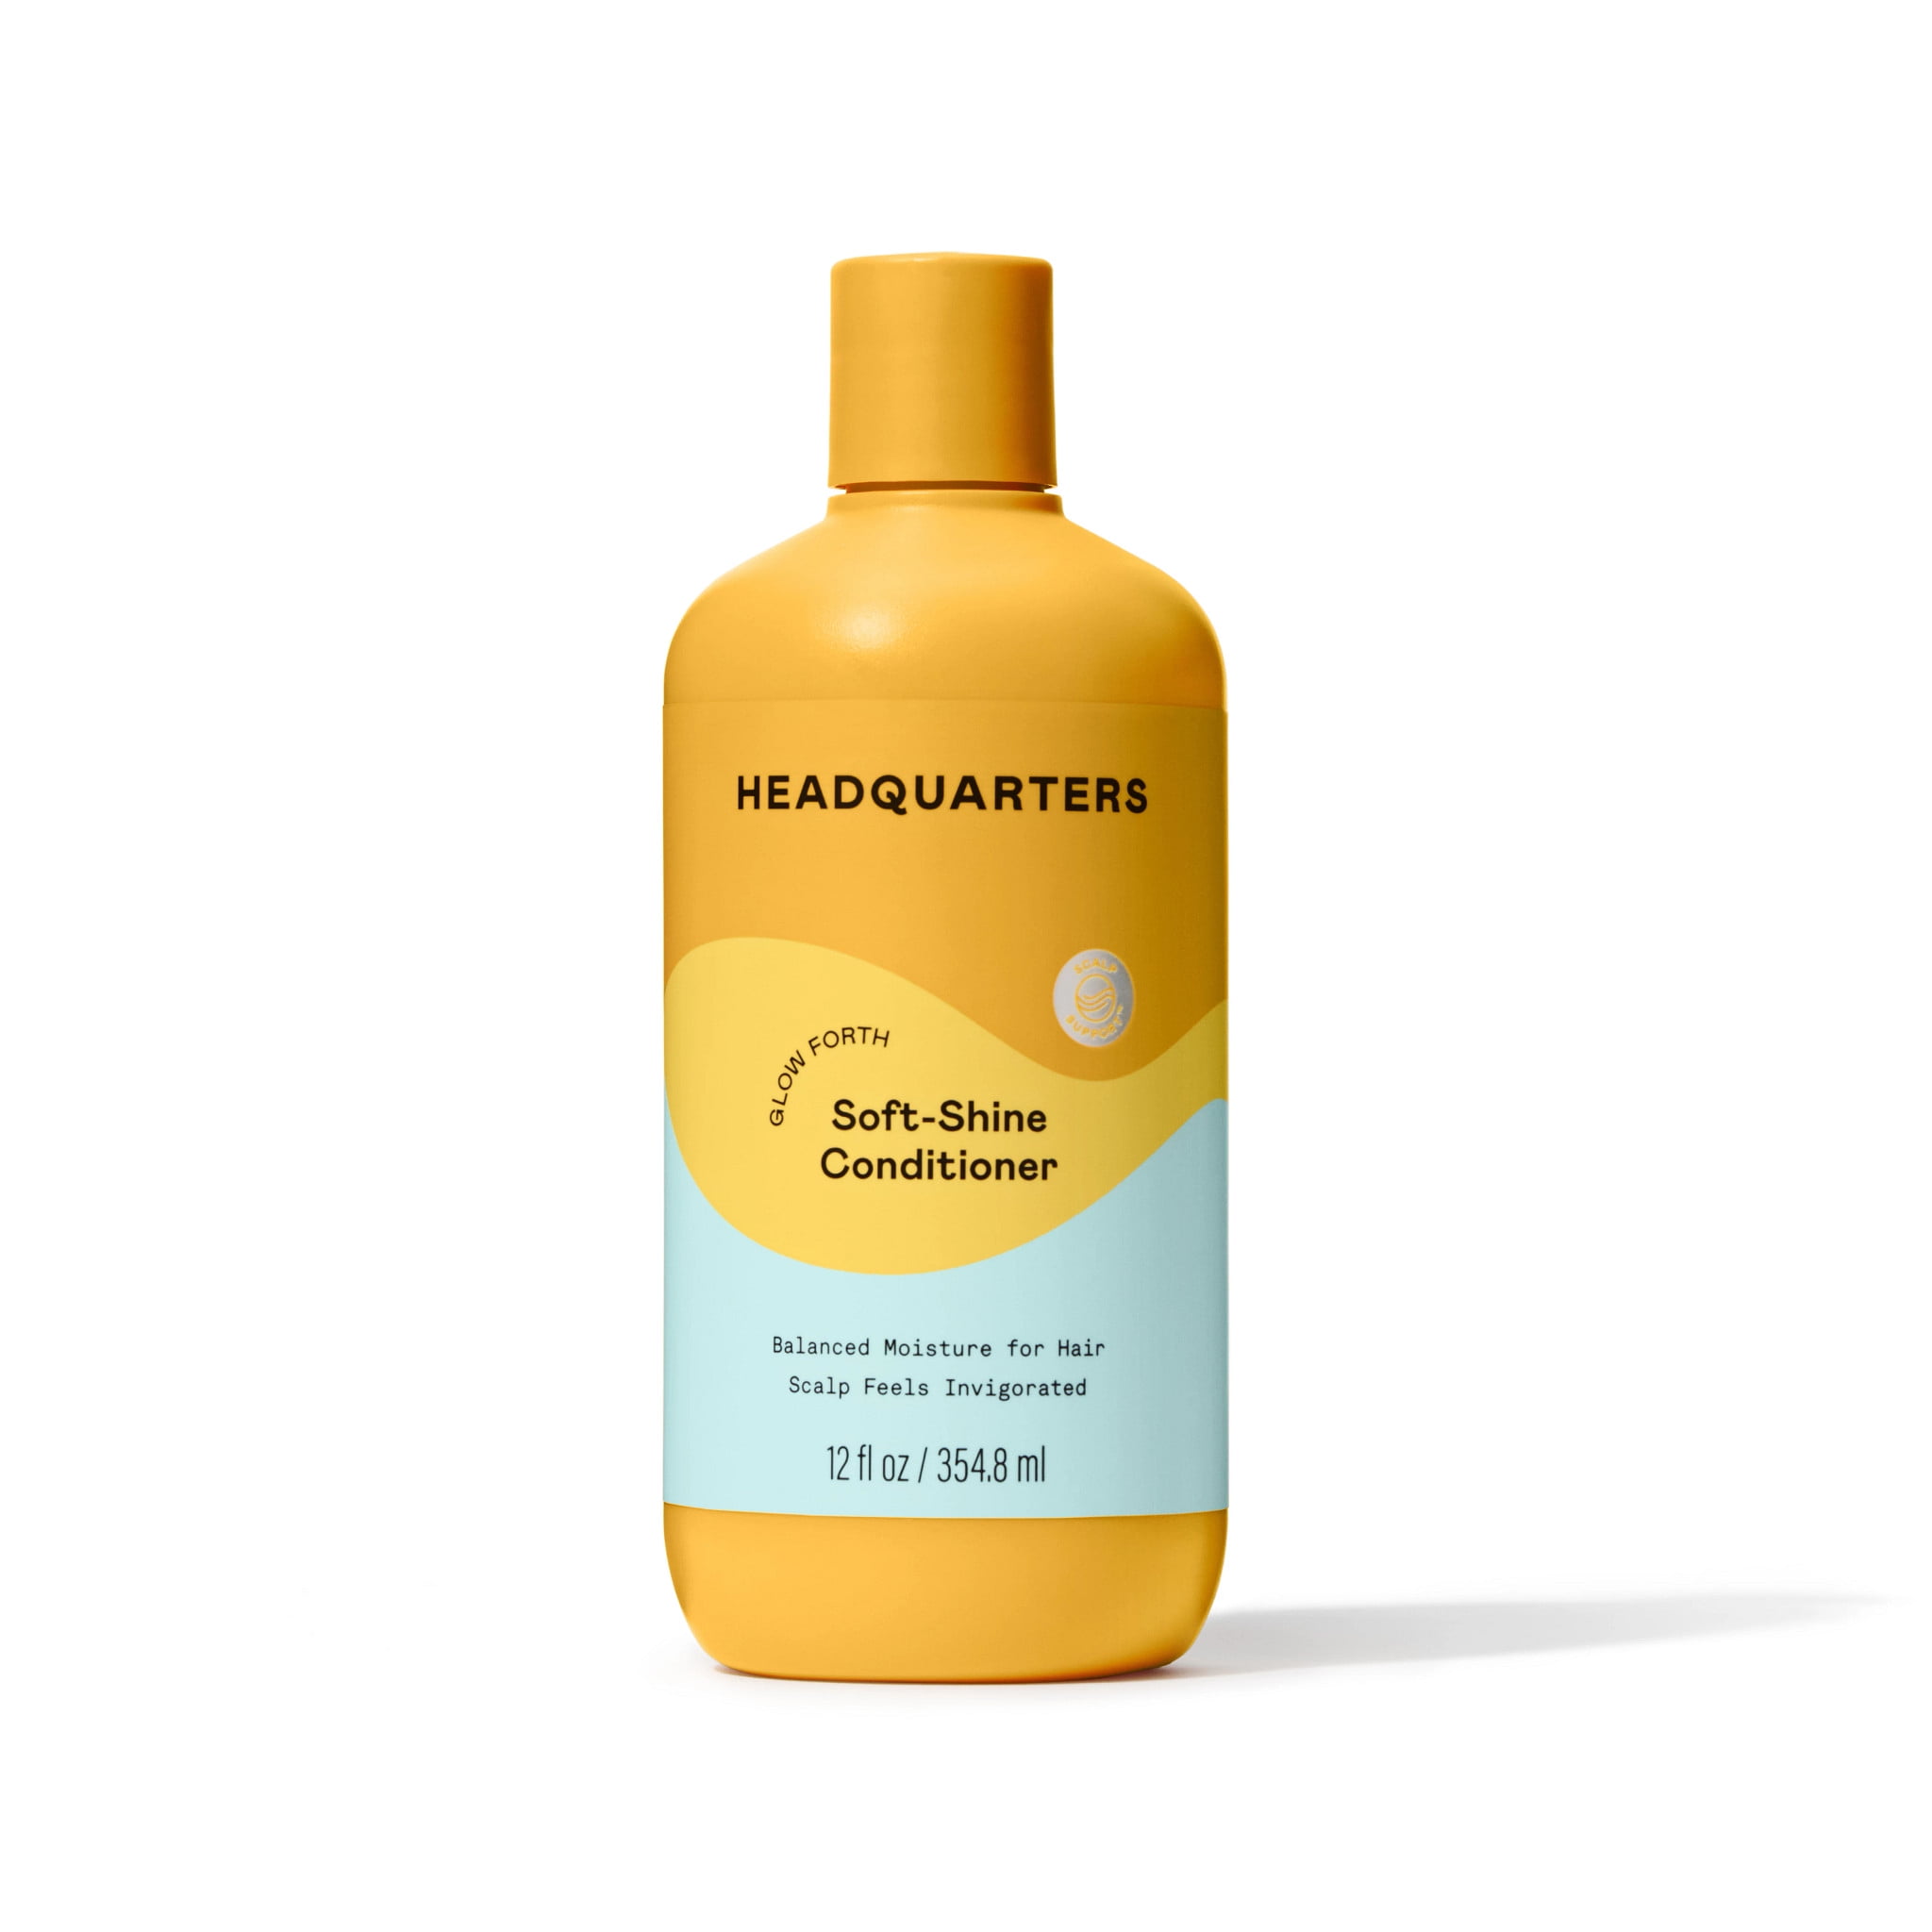 Headquarters Soft-Shine Conditioner for Balanced or Combination